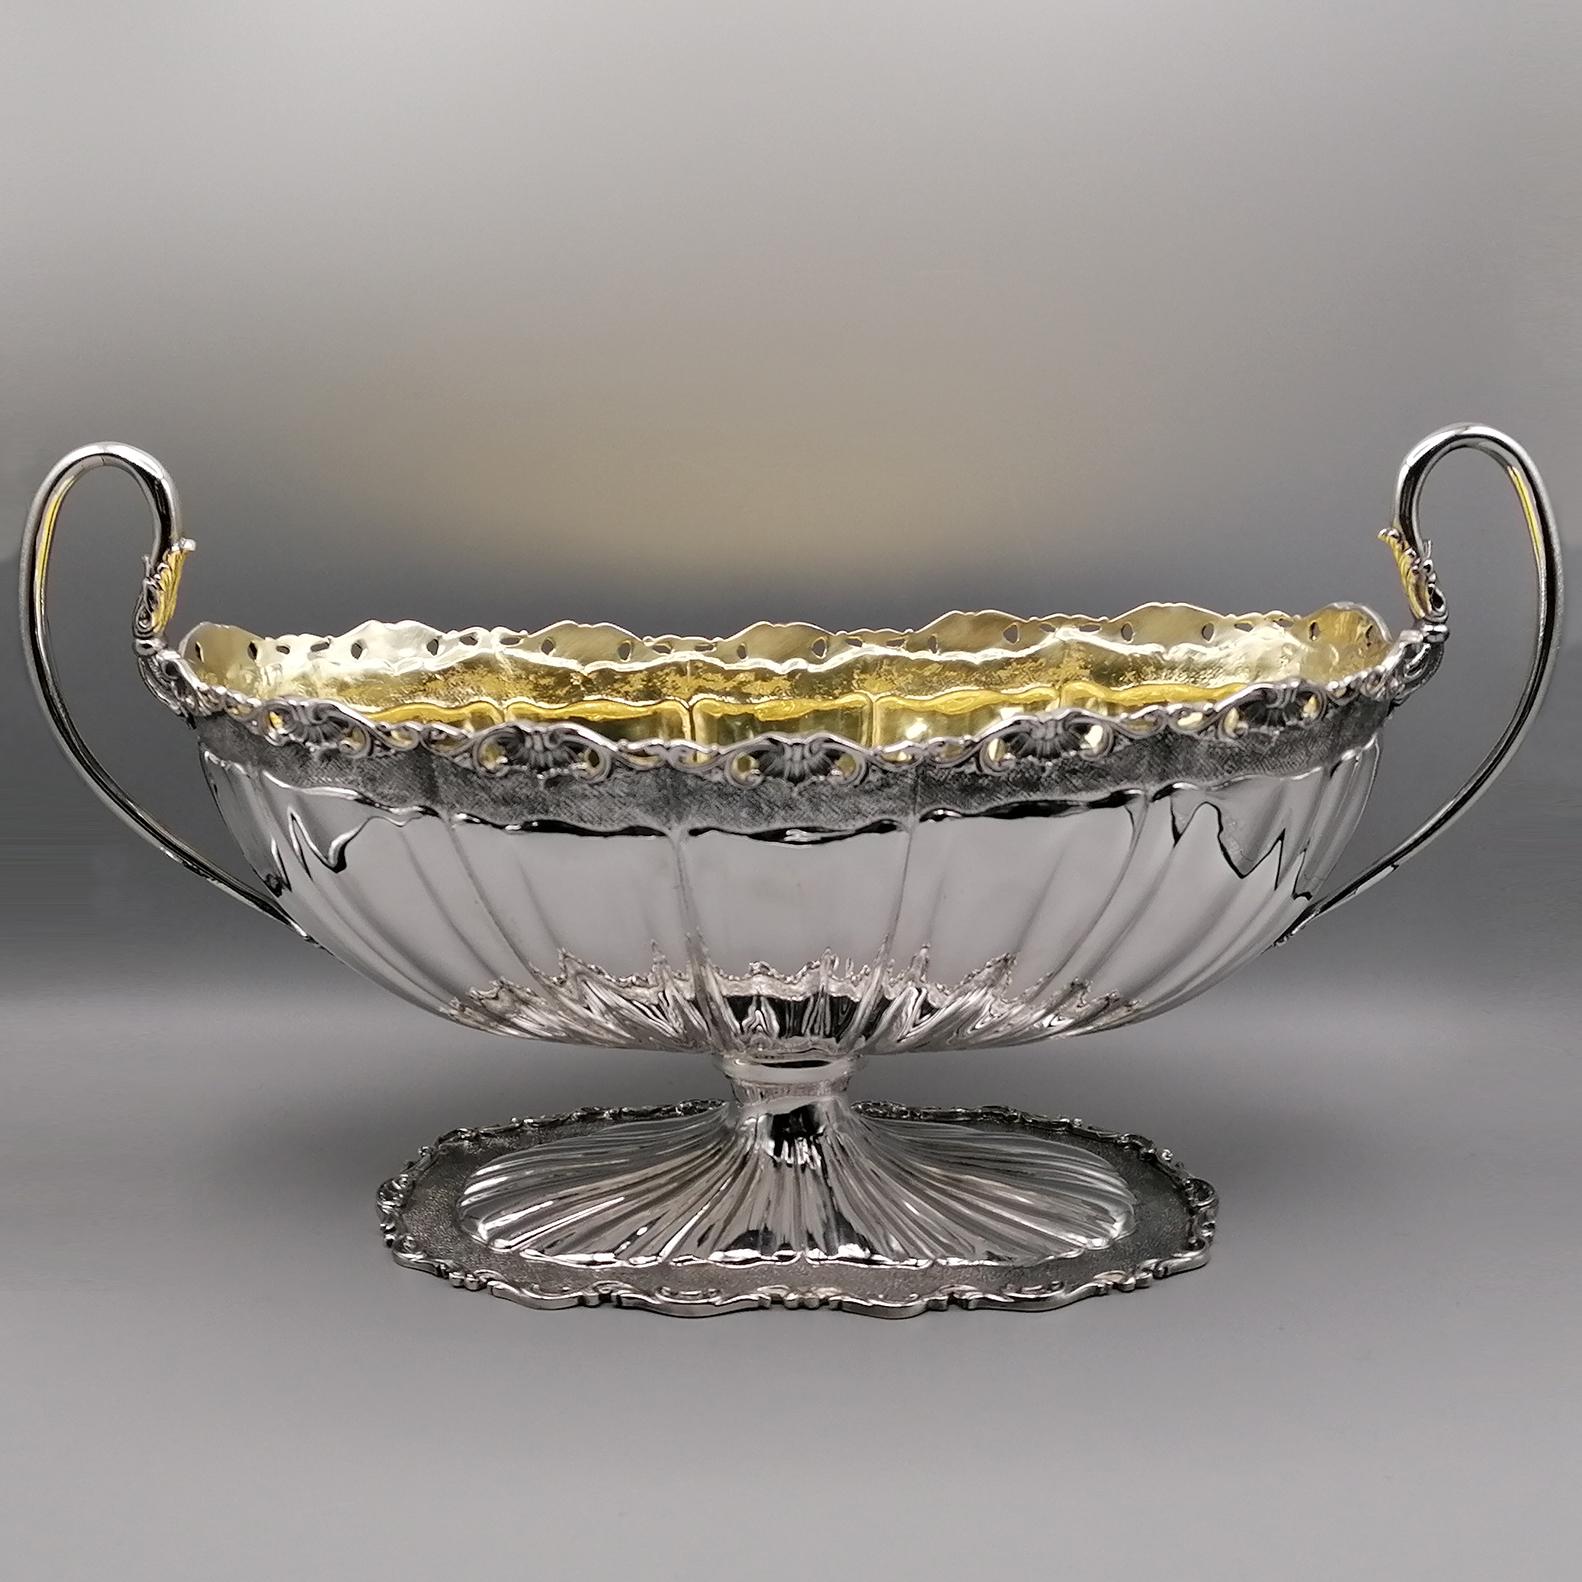 This type of centerpiece was very much in vogue in the prestigious and aristocratic houses of the 1700s.
It was used to contain fruit or be decorated with floral compositions and positioned in the center or, if the owner owned more than one, on the